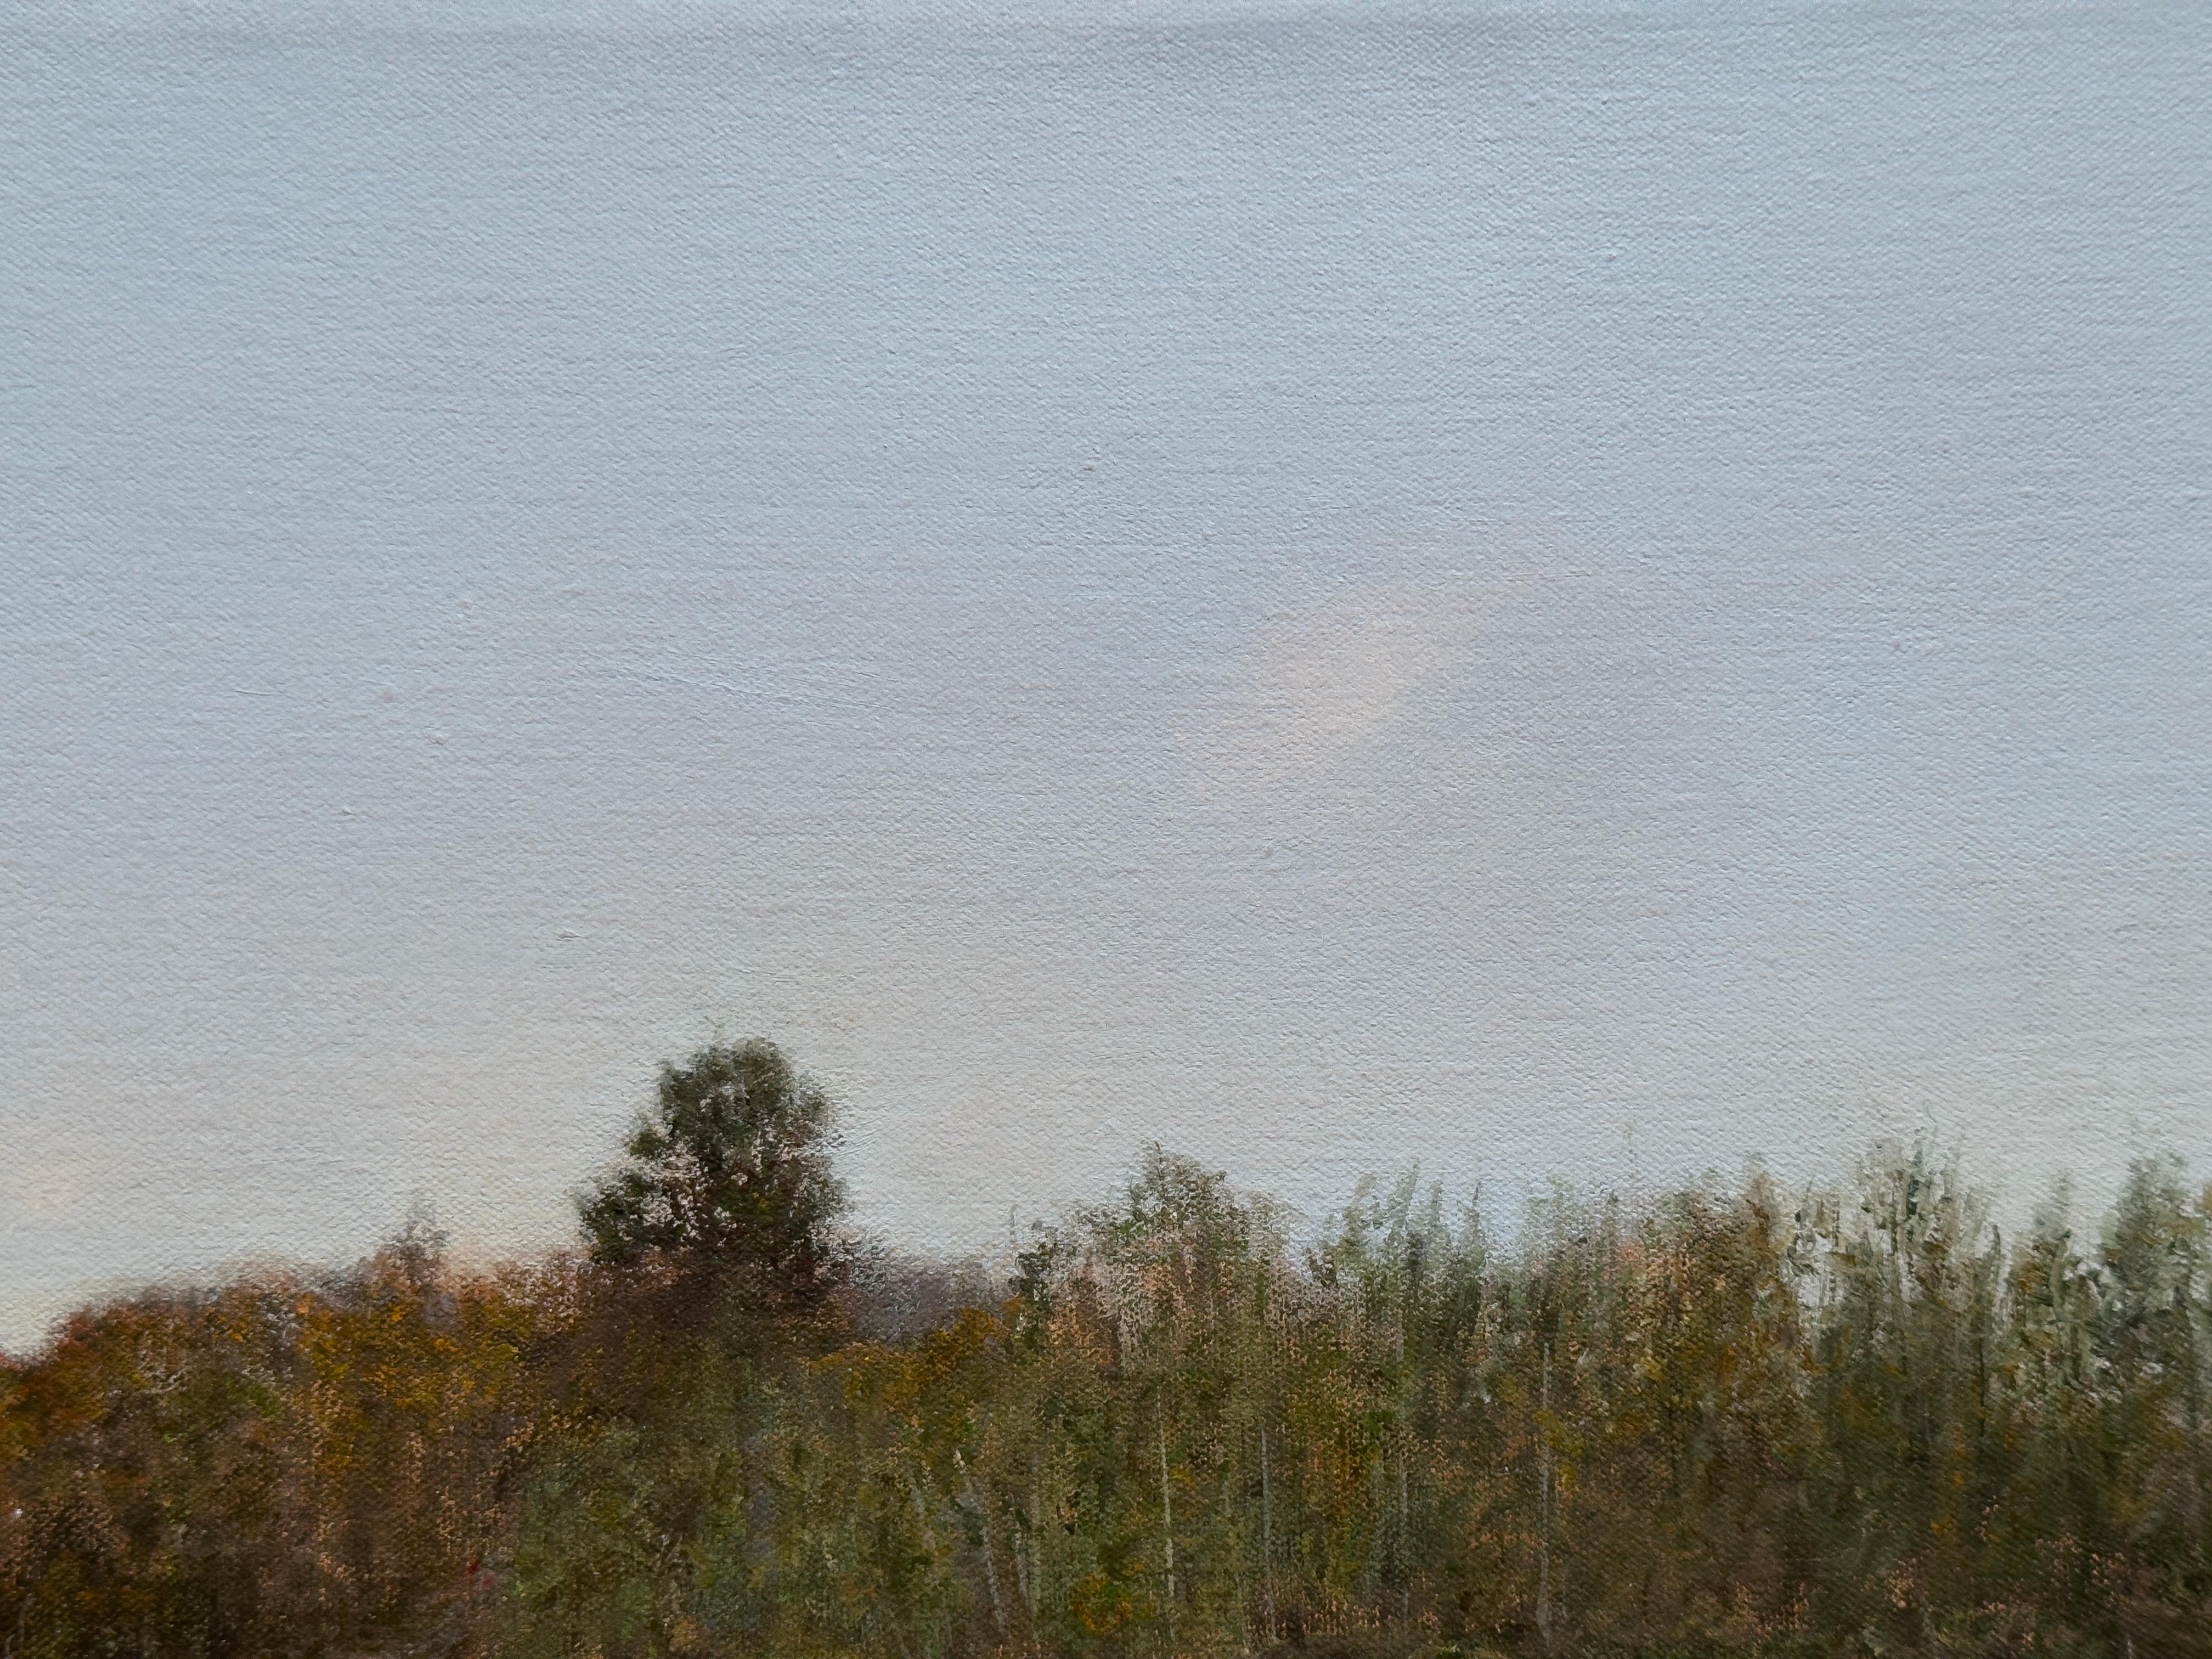 OXBOW LAGOON, SAUGATUCK, MICHIGAN - Landscape/ Realism / Waterscape / Peaceful For Sale 3